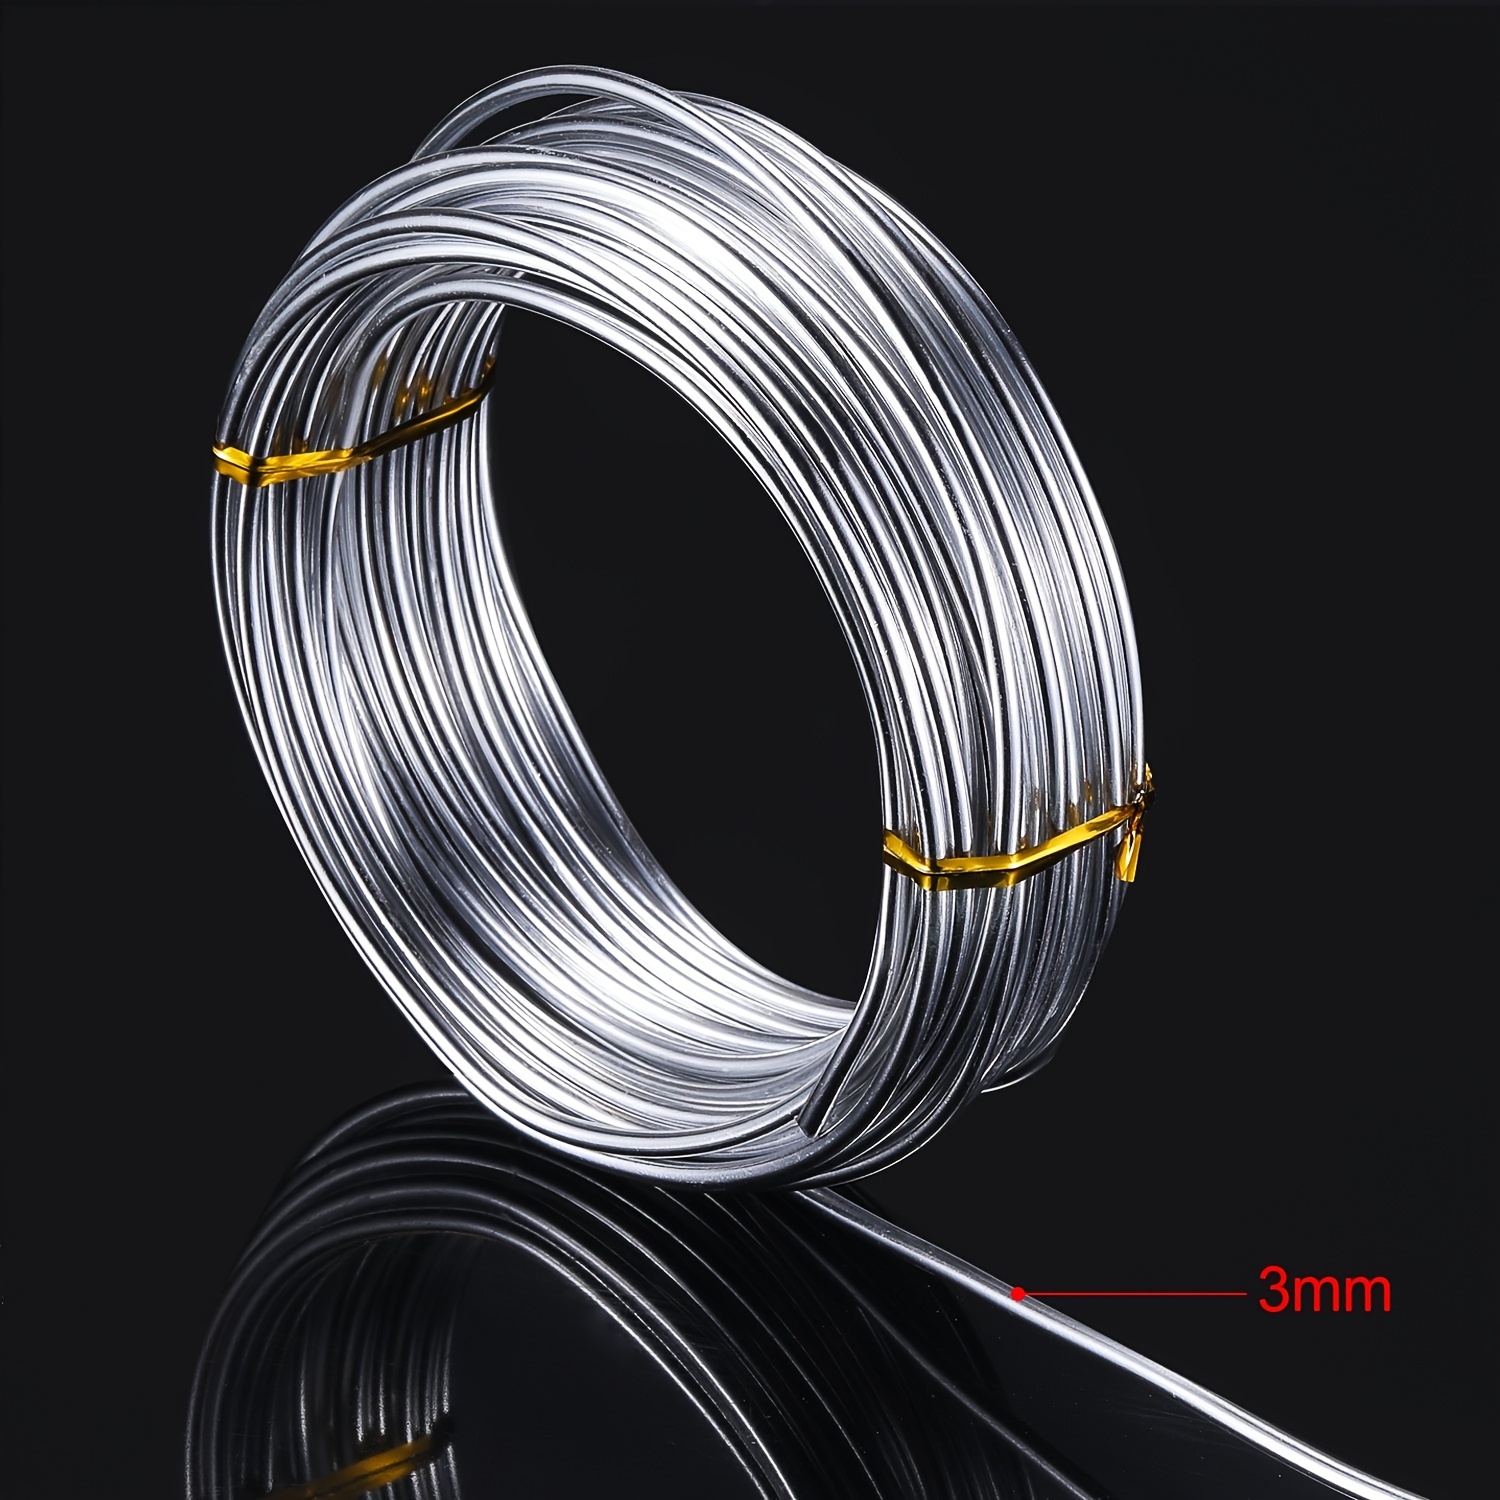 Silver Aluminum Wire Metal Craft Wire 3mm Diameter (9 Gauge) 10 M (32.8 Feet) Bendable and Flexible Floral Armature Wire for DIY Arts and Craft Pro